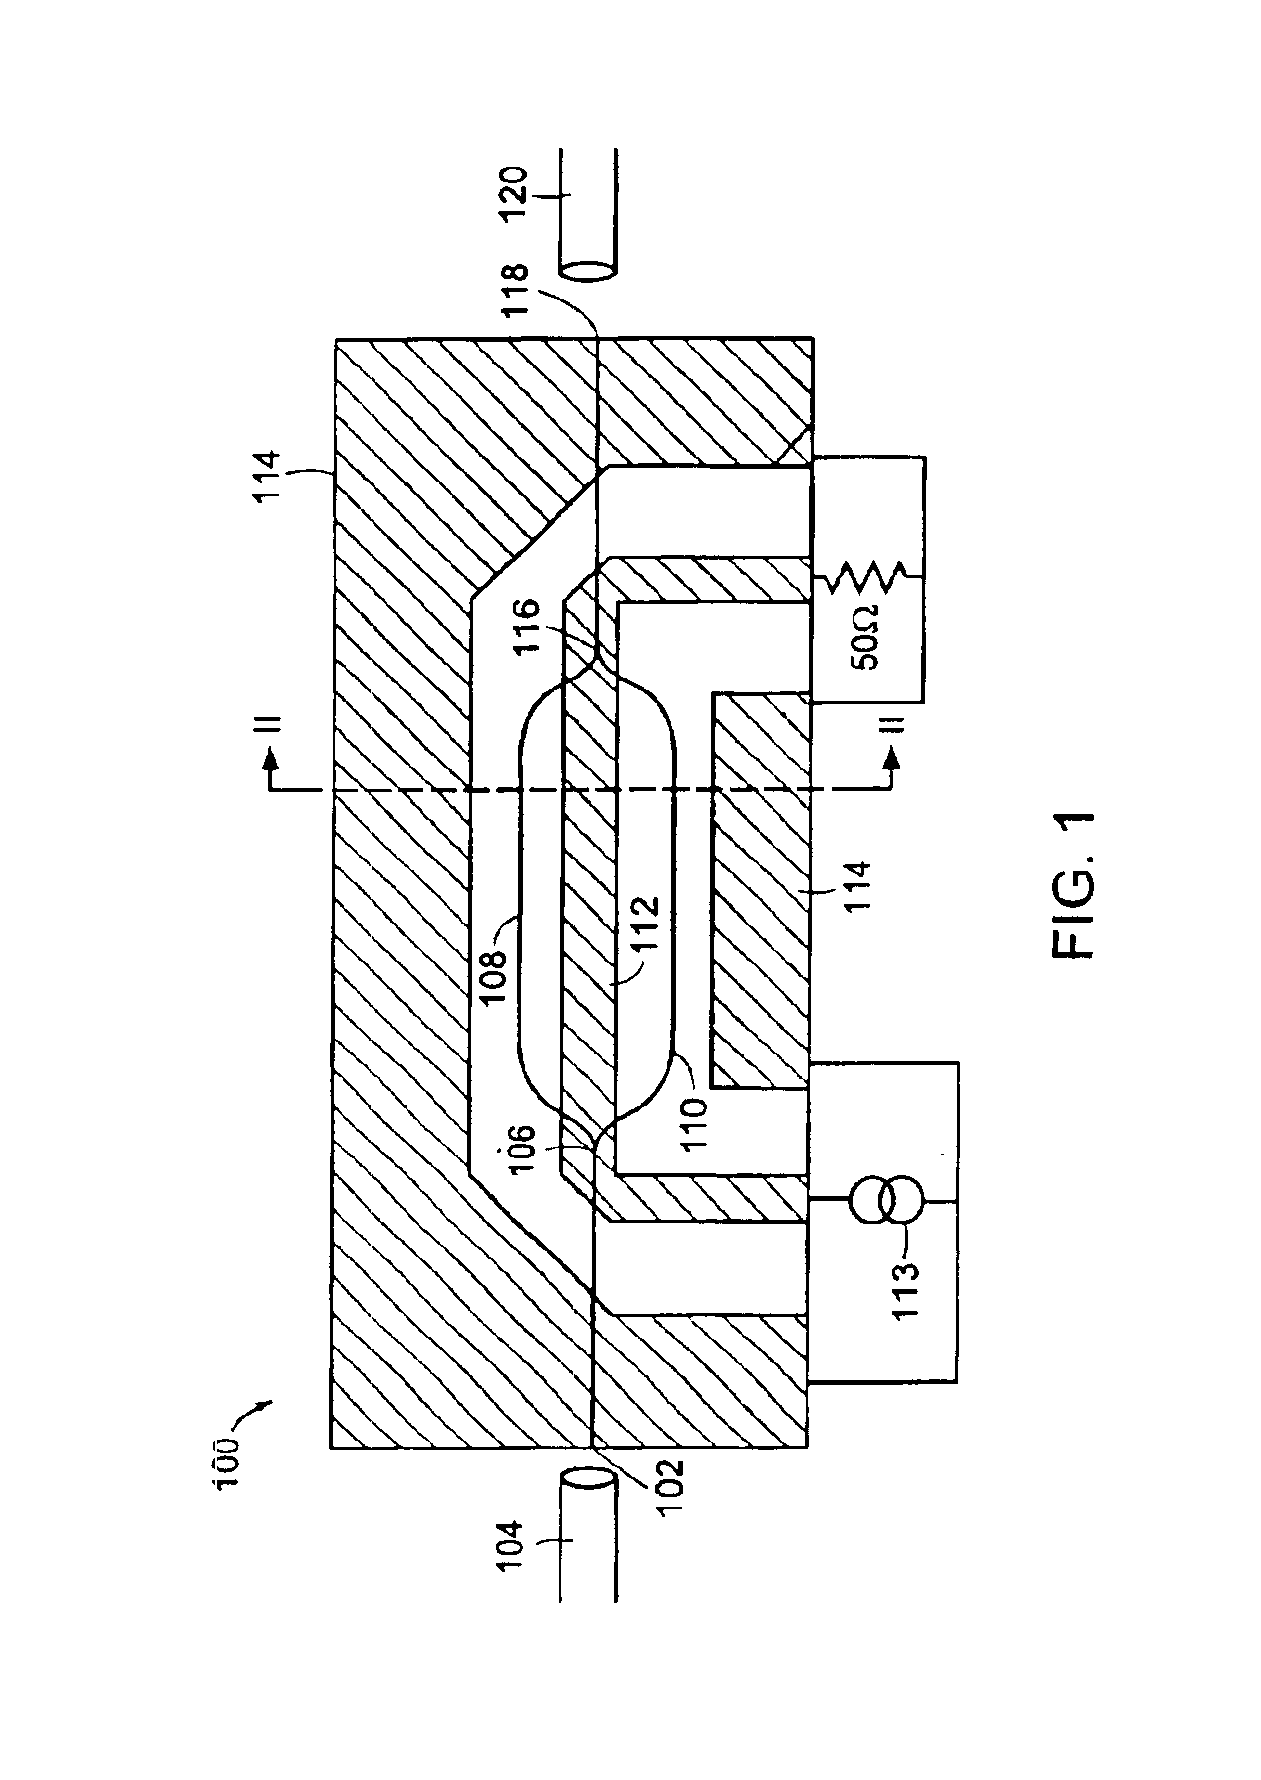 Suppression of high frequency resonance in an electro-optical modulator